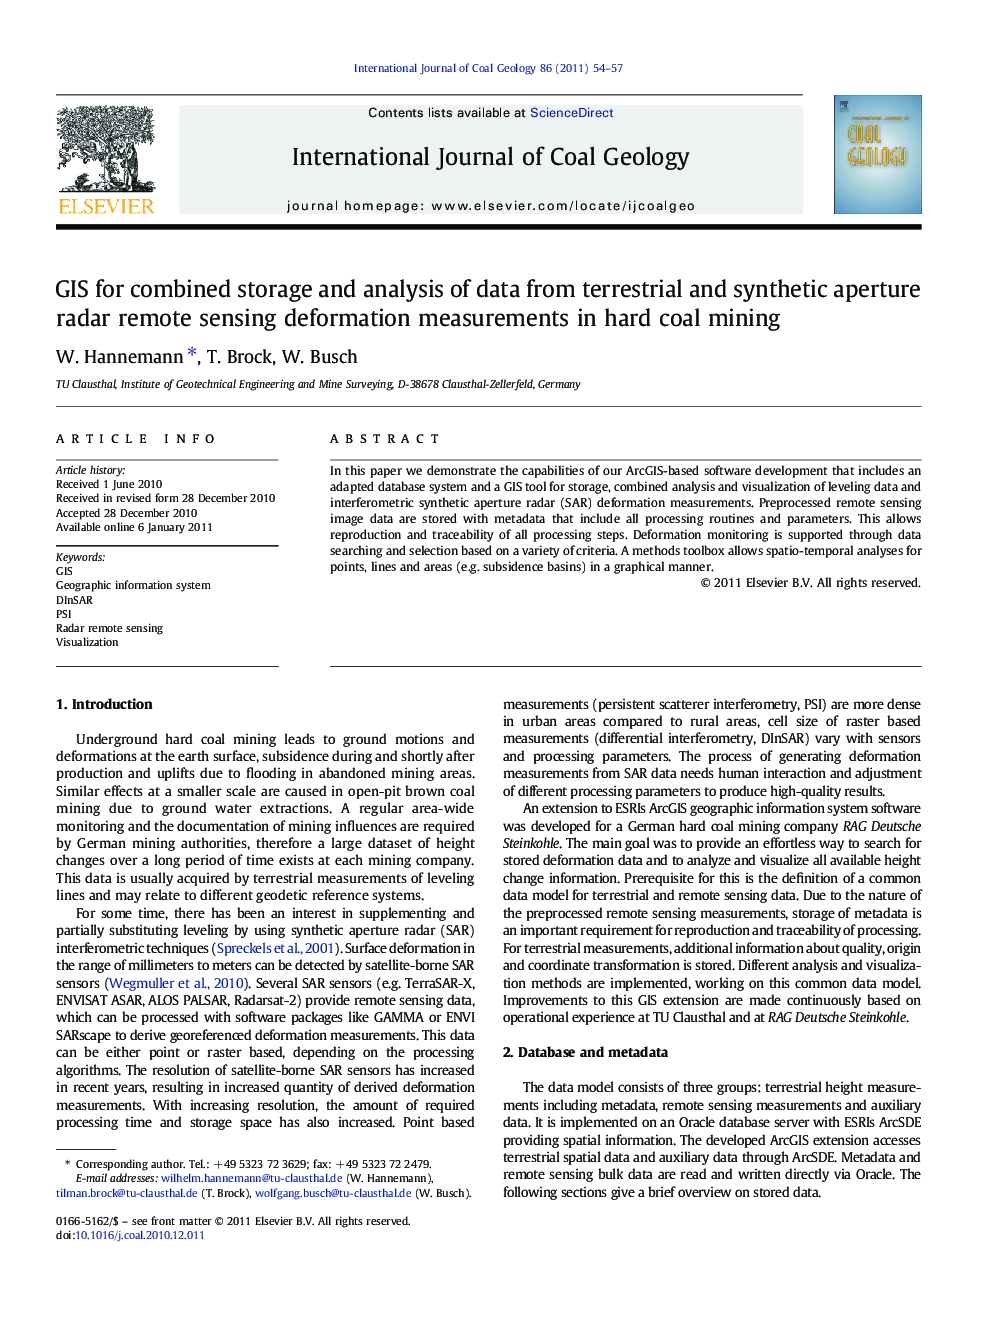 GIS for combined storage and analysis of data from terrestrial and synthetic aperture radar remote sensing deformation measurements in hard coal mining